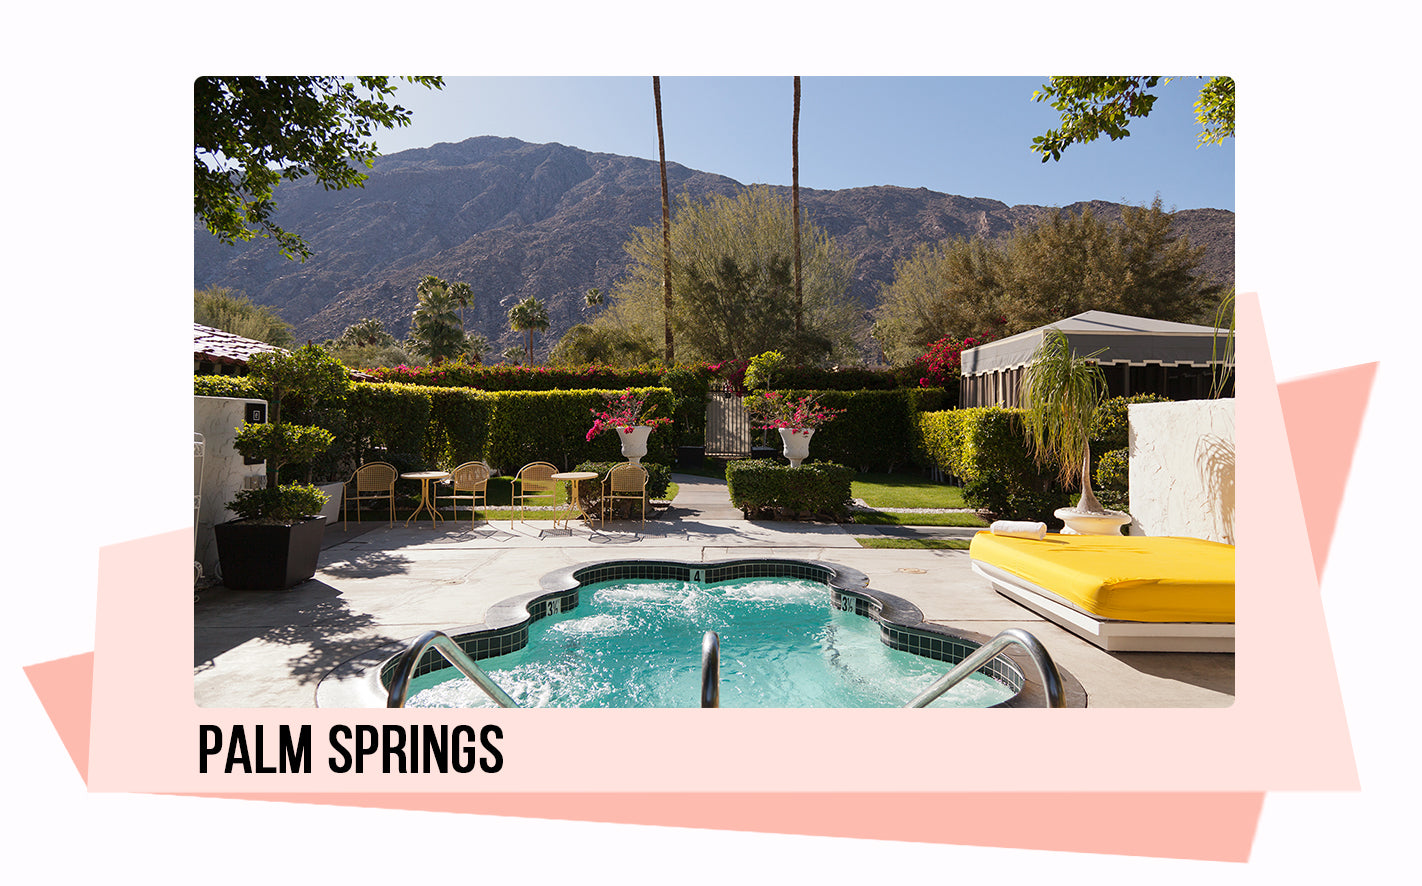 The Hottest Cali Winter Getaways - Palm Springs